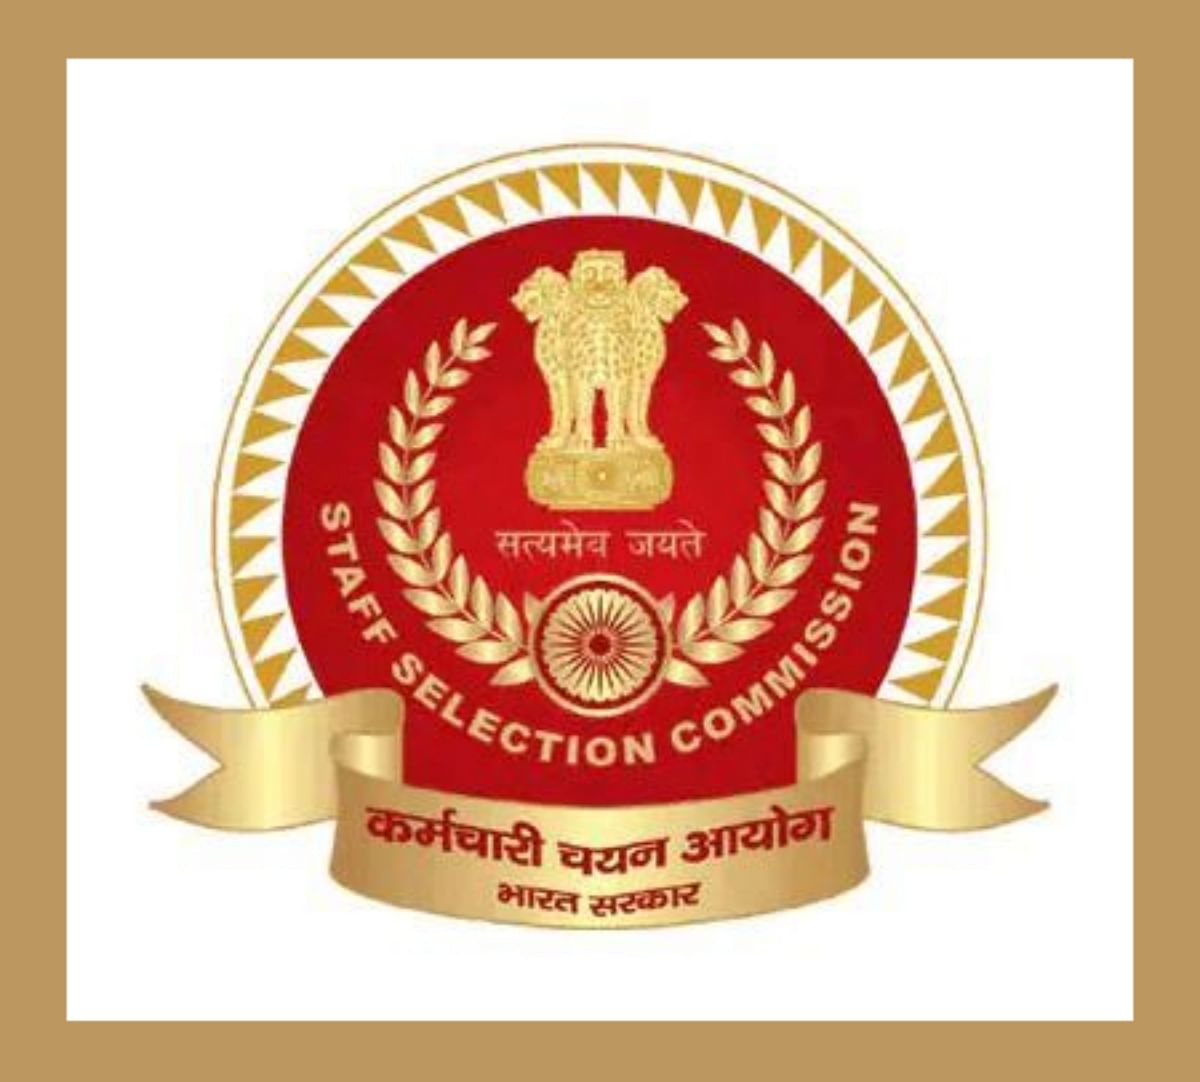 SSC to conduct re-examination for constable recruitment on March 30